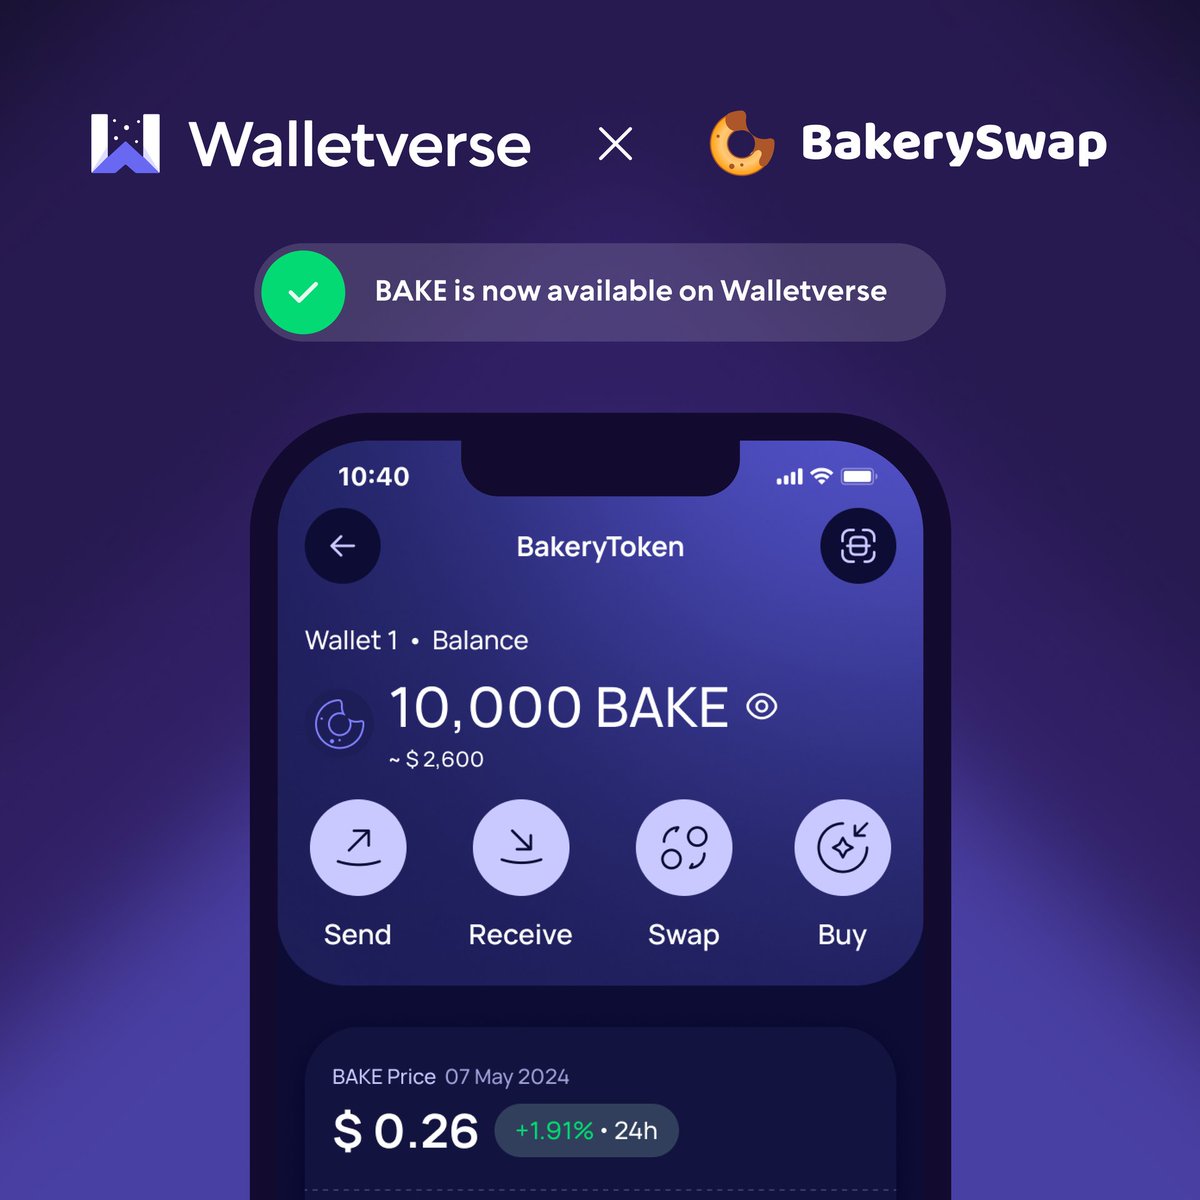 $BAKE is now available on #Walletverse!

@bakery_swap is the all-in-one #DeFi platform that provides both #AMM and #NFT Marketplace solutions in one place.

📲Download Walletverse: walletverse.onelink.me/BM98/4cqw5e96

#BakeryToken #BAKE #bakeryswap